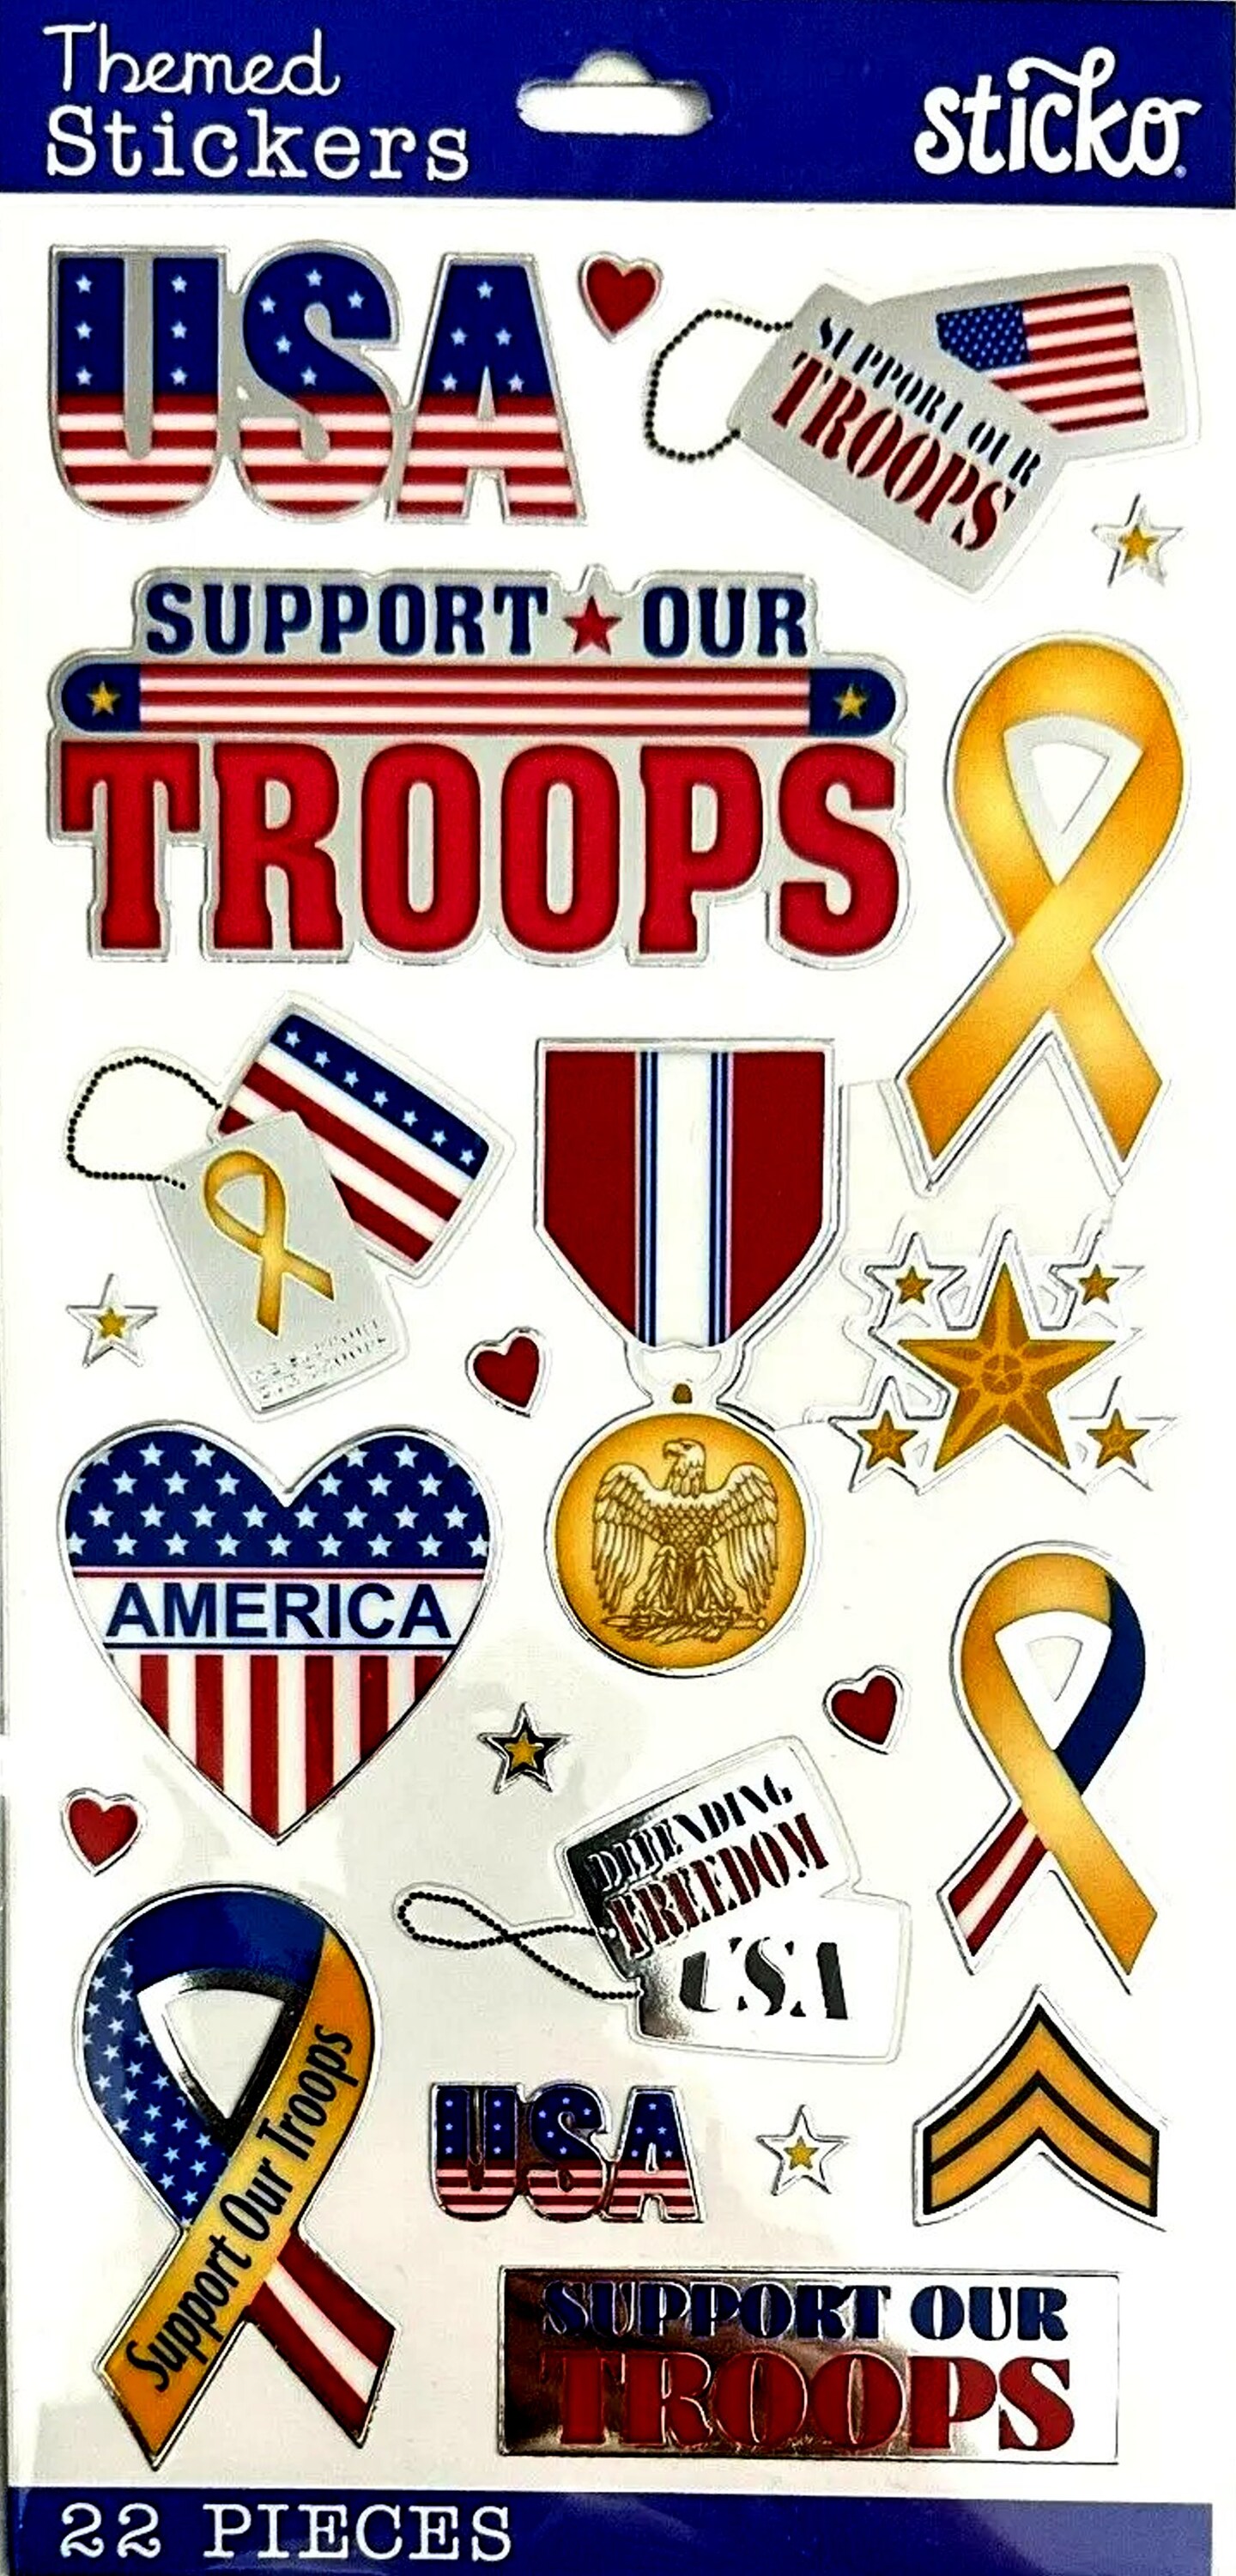 Sticko Support Our Troops Stickers